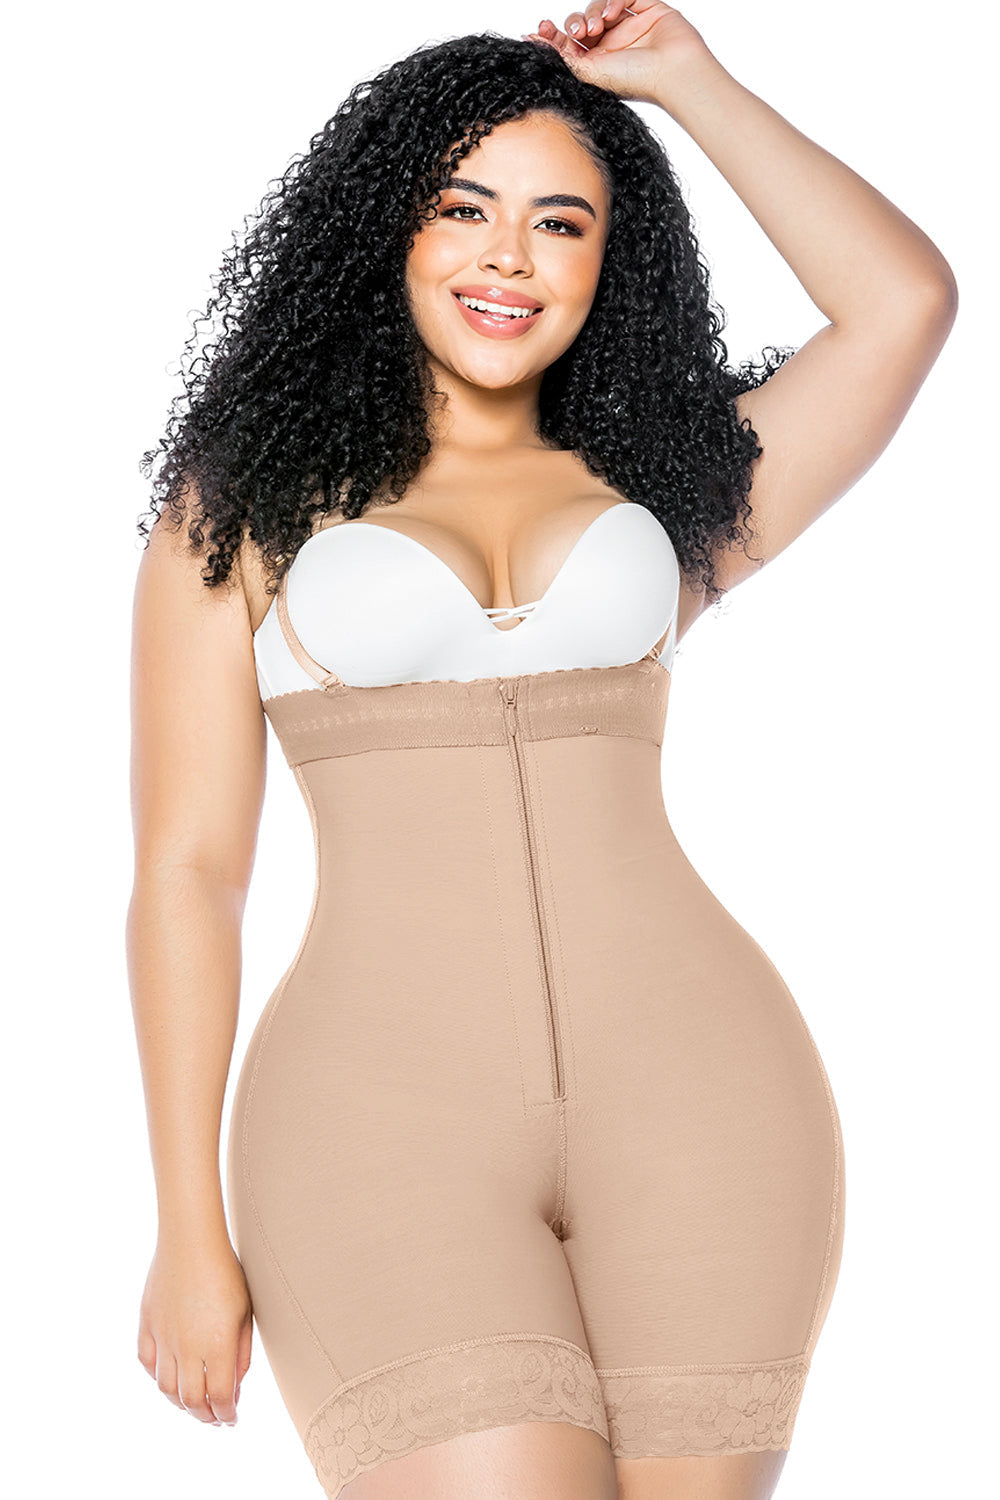 Fajas Colombianas Butt Lifter Shapewear Belly Control Panties Crotch with Zipper